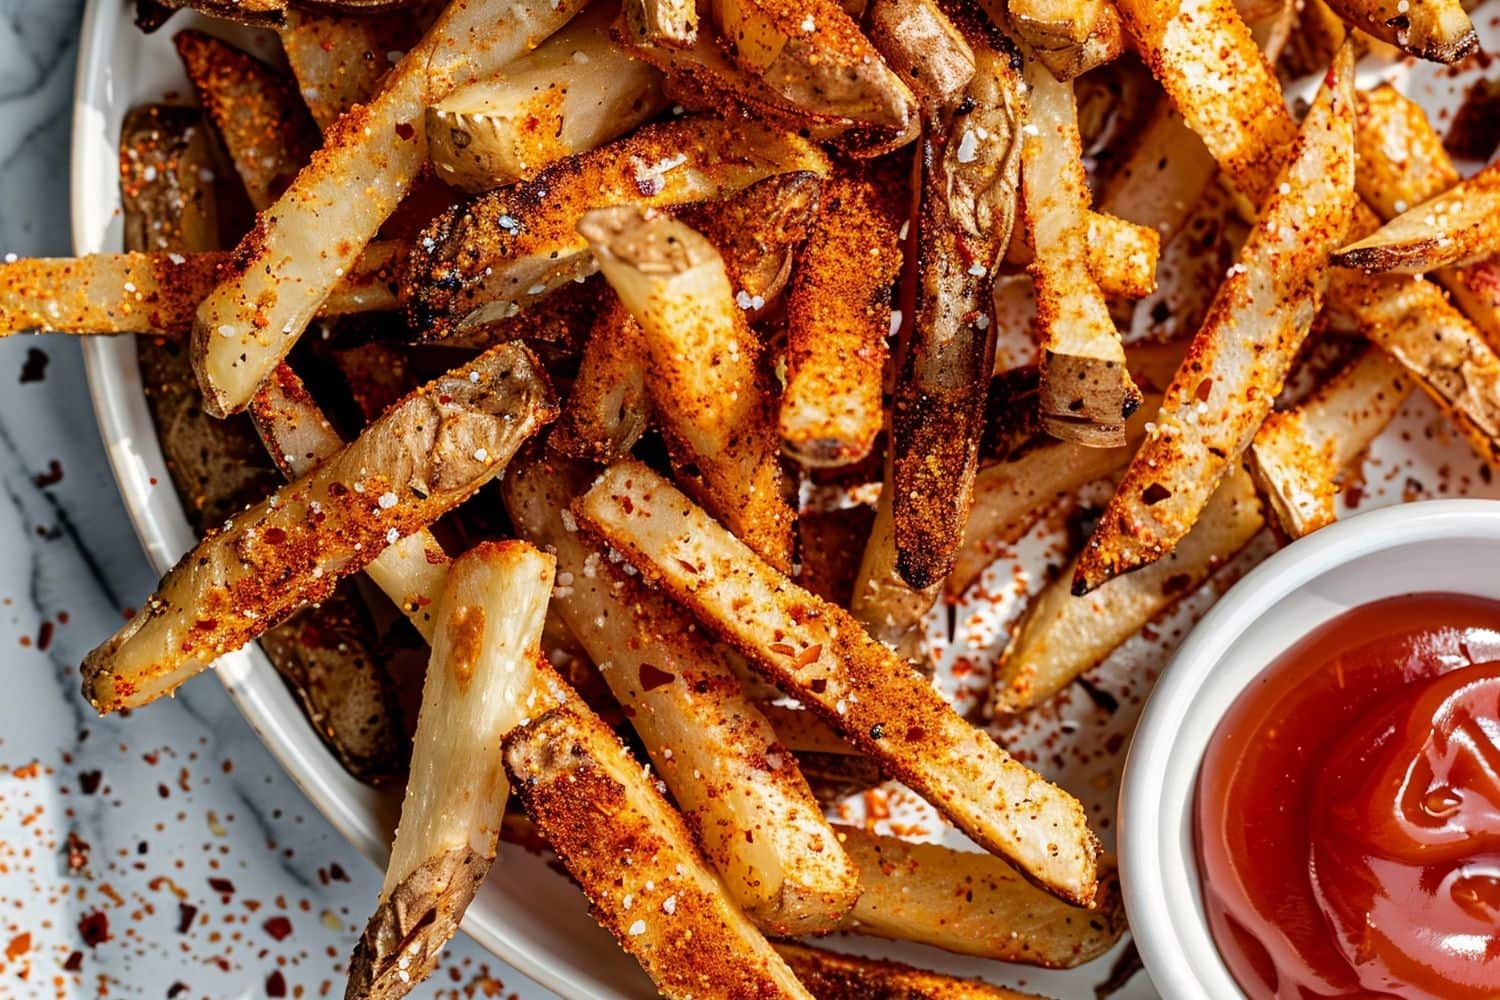 Top View of Well-Seasoned Wingstop Fries on a White Plate with a Ramekin of Ketchup to the Side